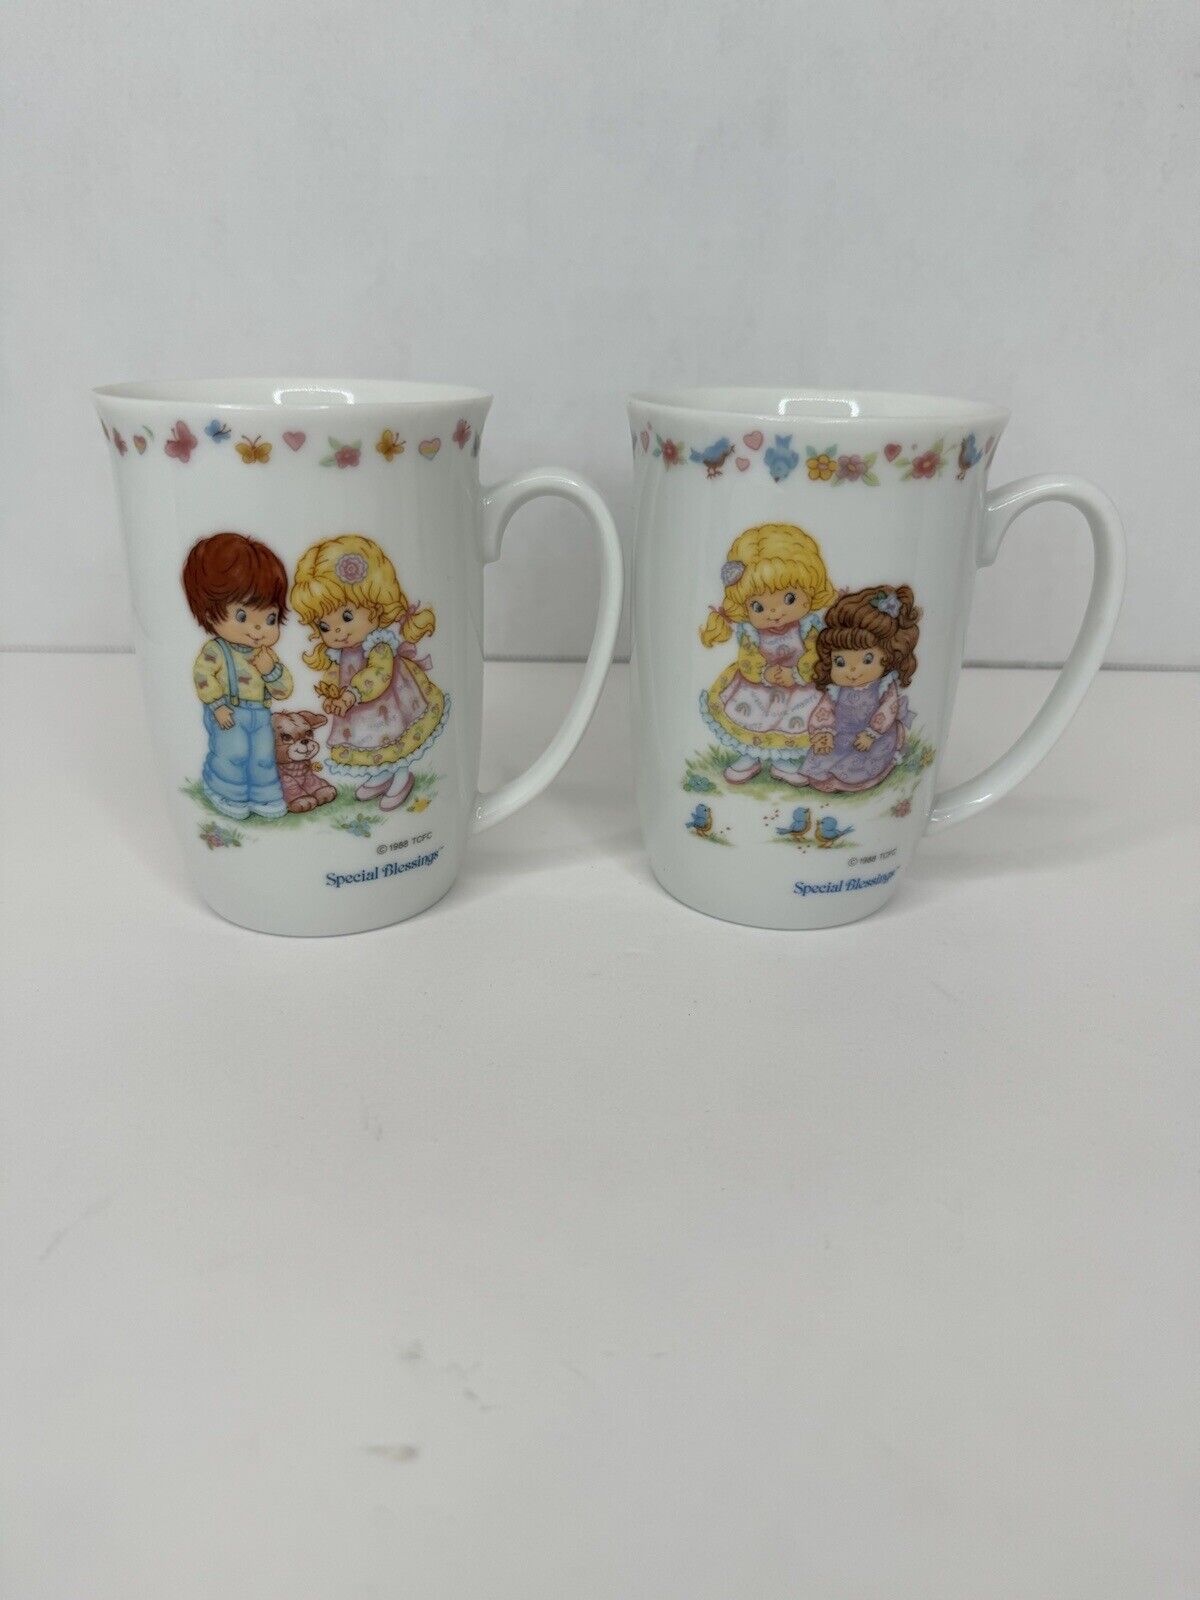 Special Blessings  (2) Mug Coffee Cup Porcelain Love Friendship 1988 Vintage